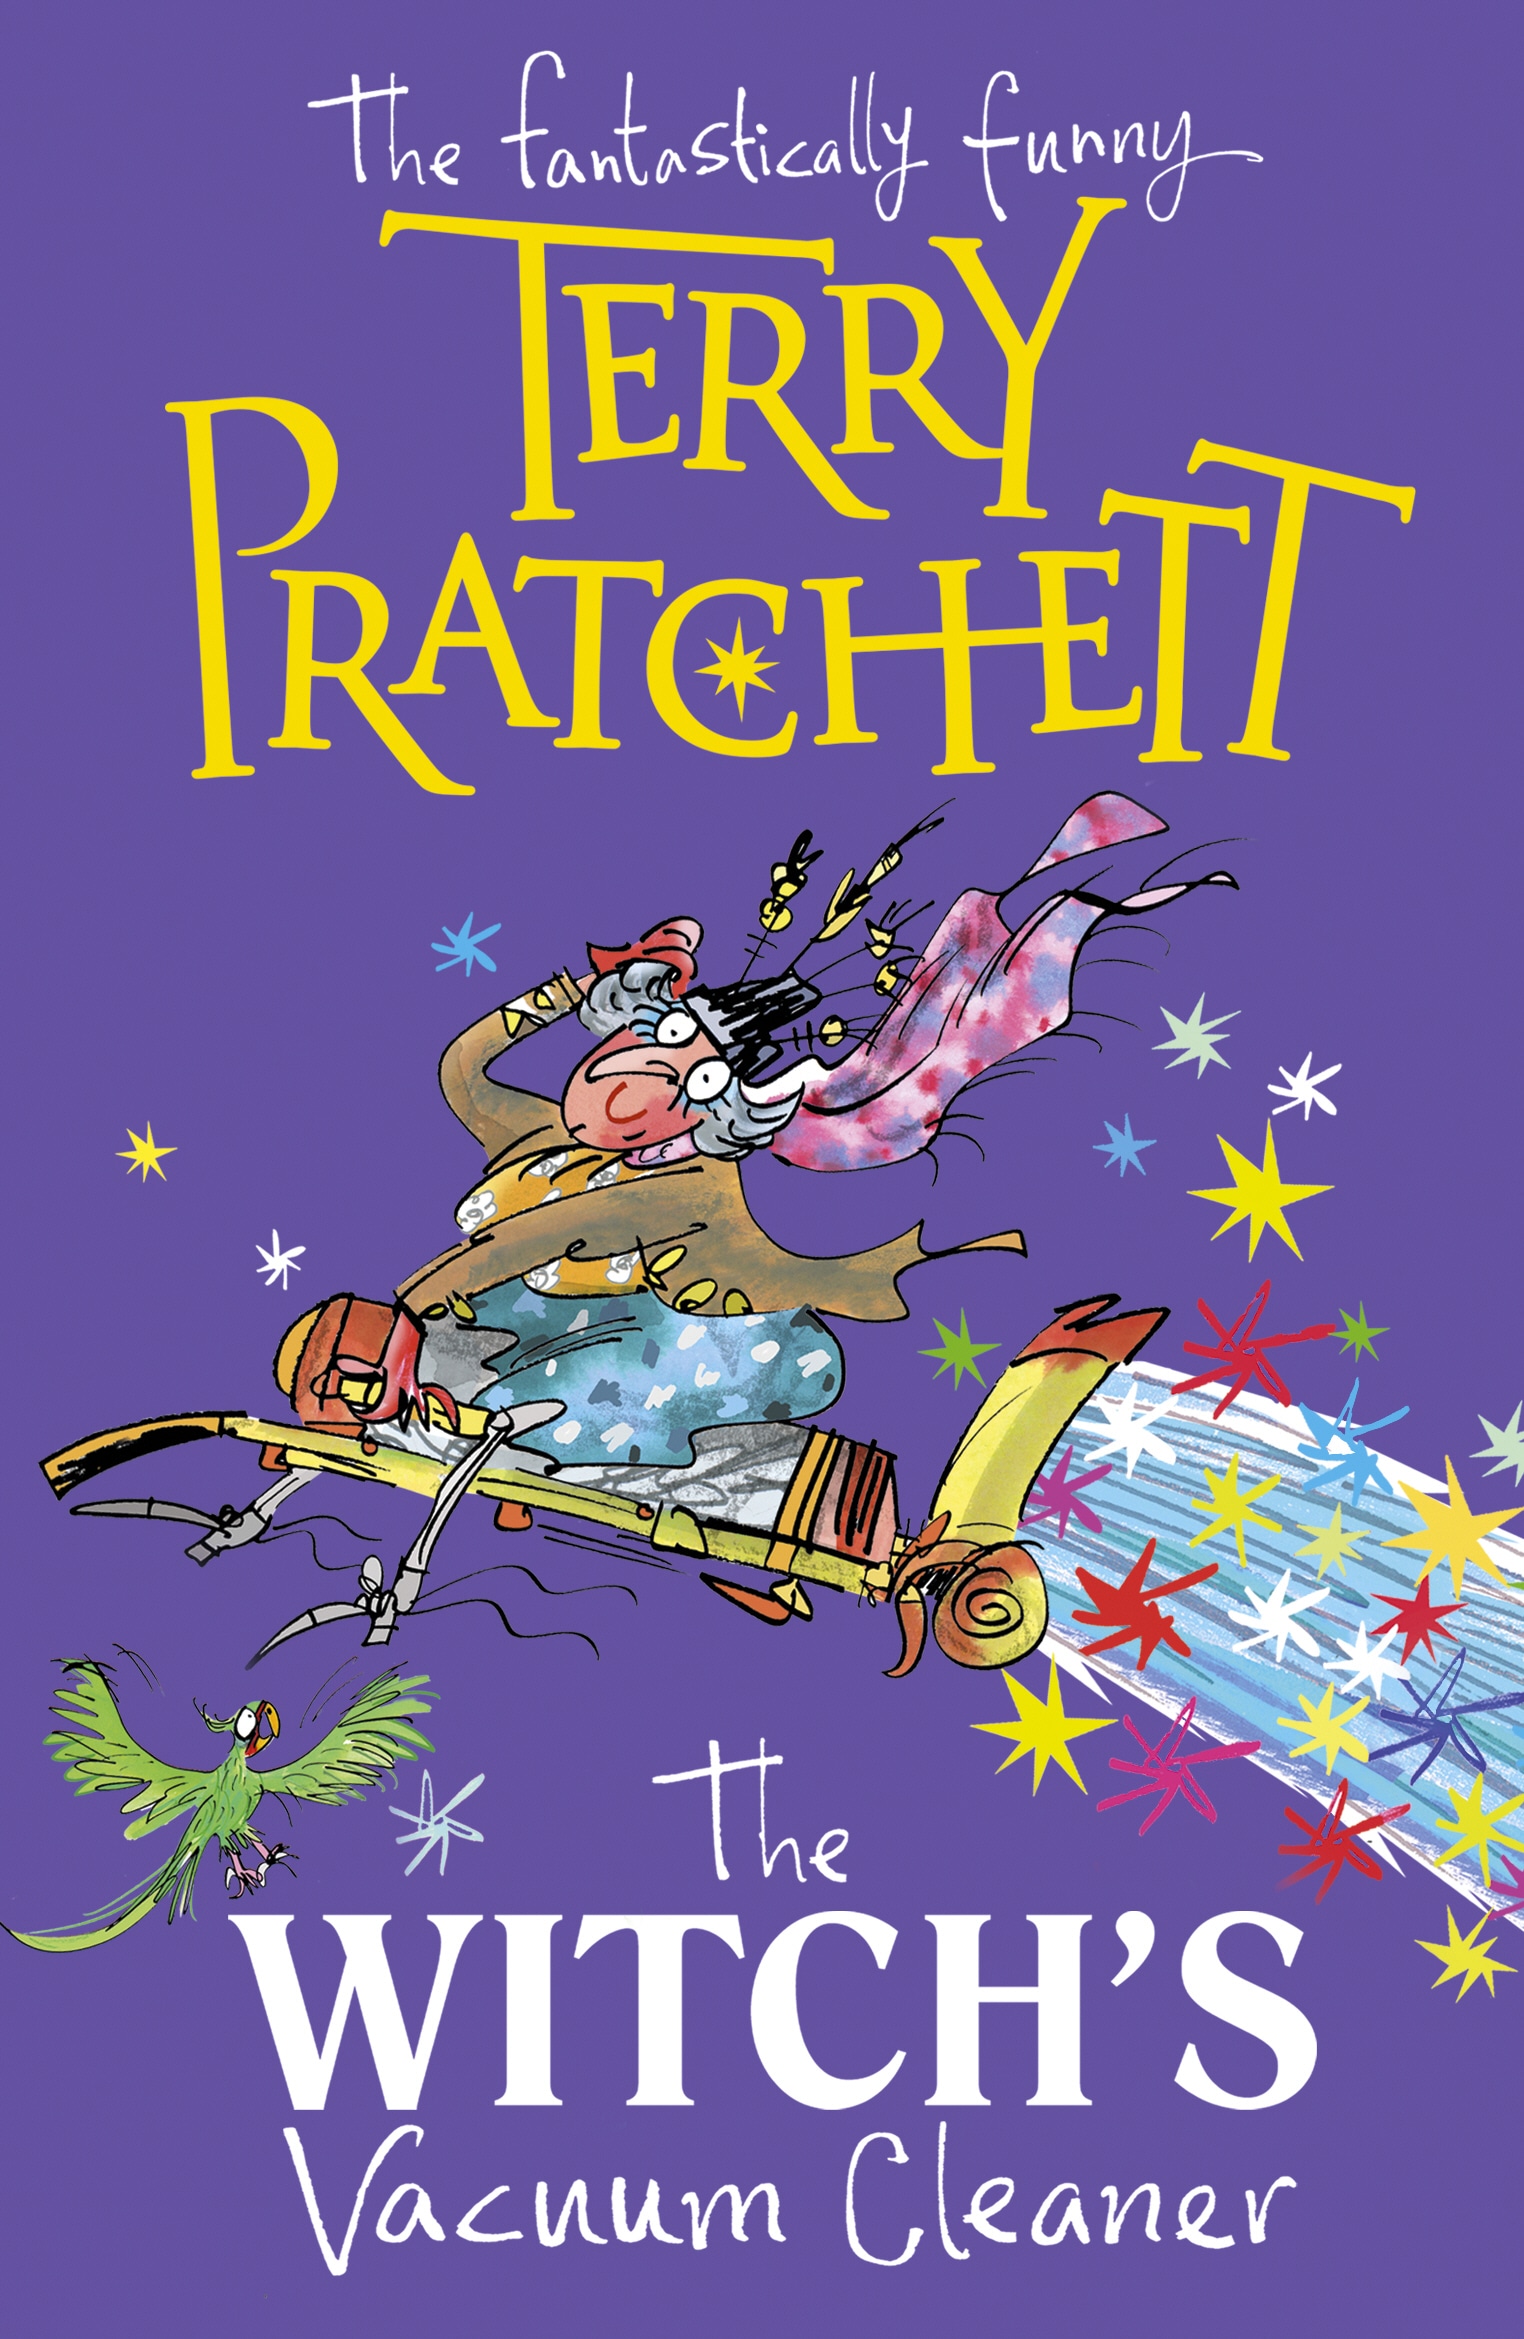 Book “The Witch's Vacuum Cleaner” by Terry Pratchett — June 15, 2017